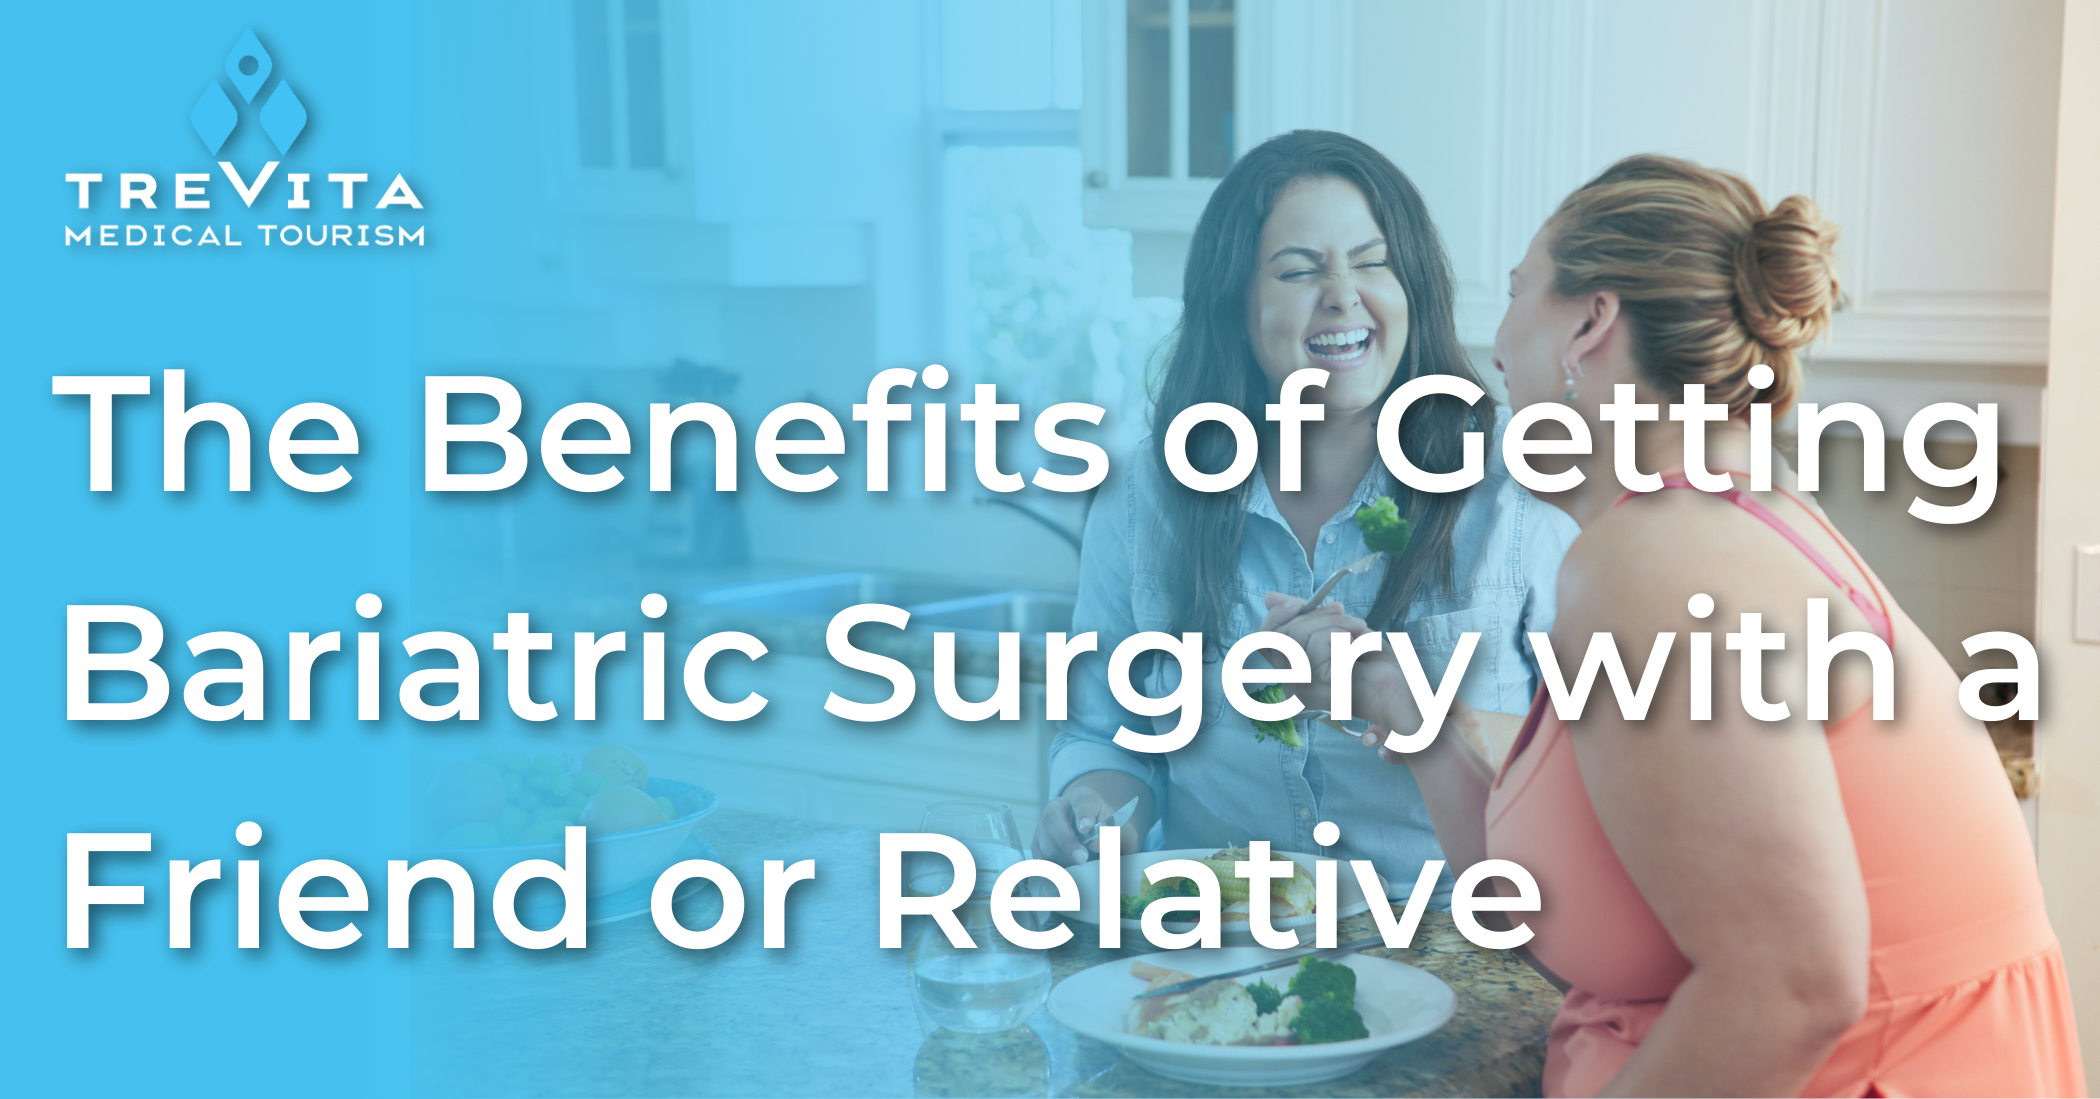 The Benefits of Getting Bariatric Surgery with a Friend or Relative